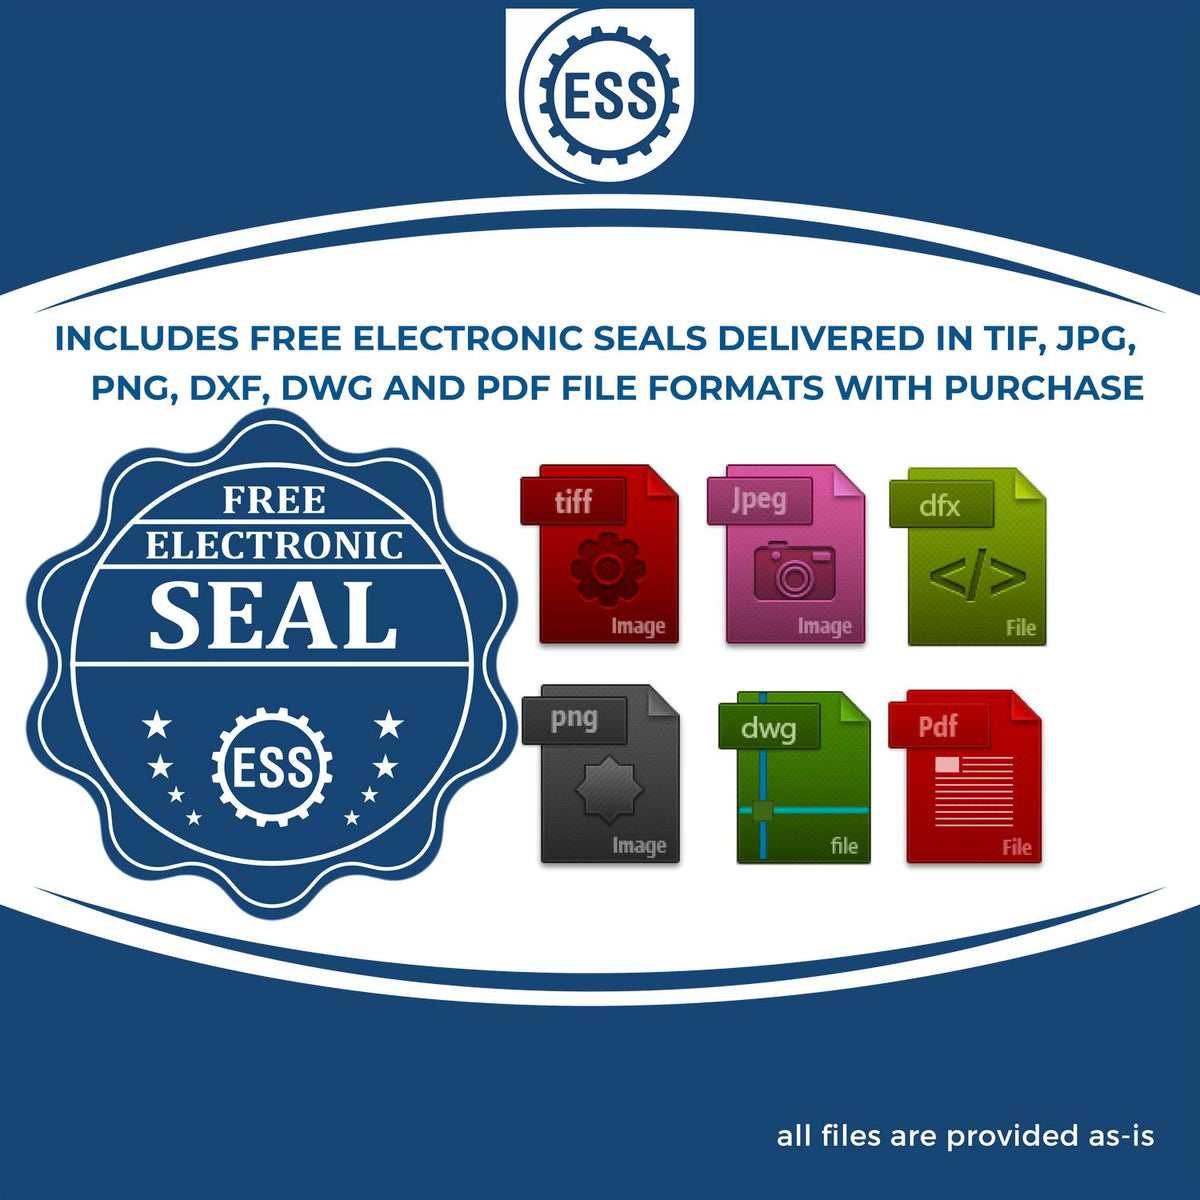 An infographic for the free electronic seal for the Soft Arkansas Professional Geologist Seal illustrating the different file type icons such as DXF, DWG, TIF, JPG and PNG.